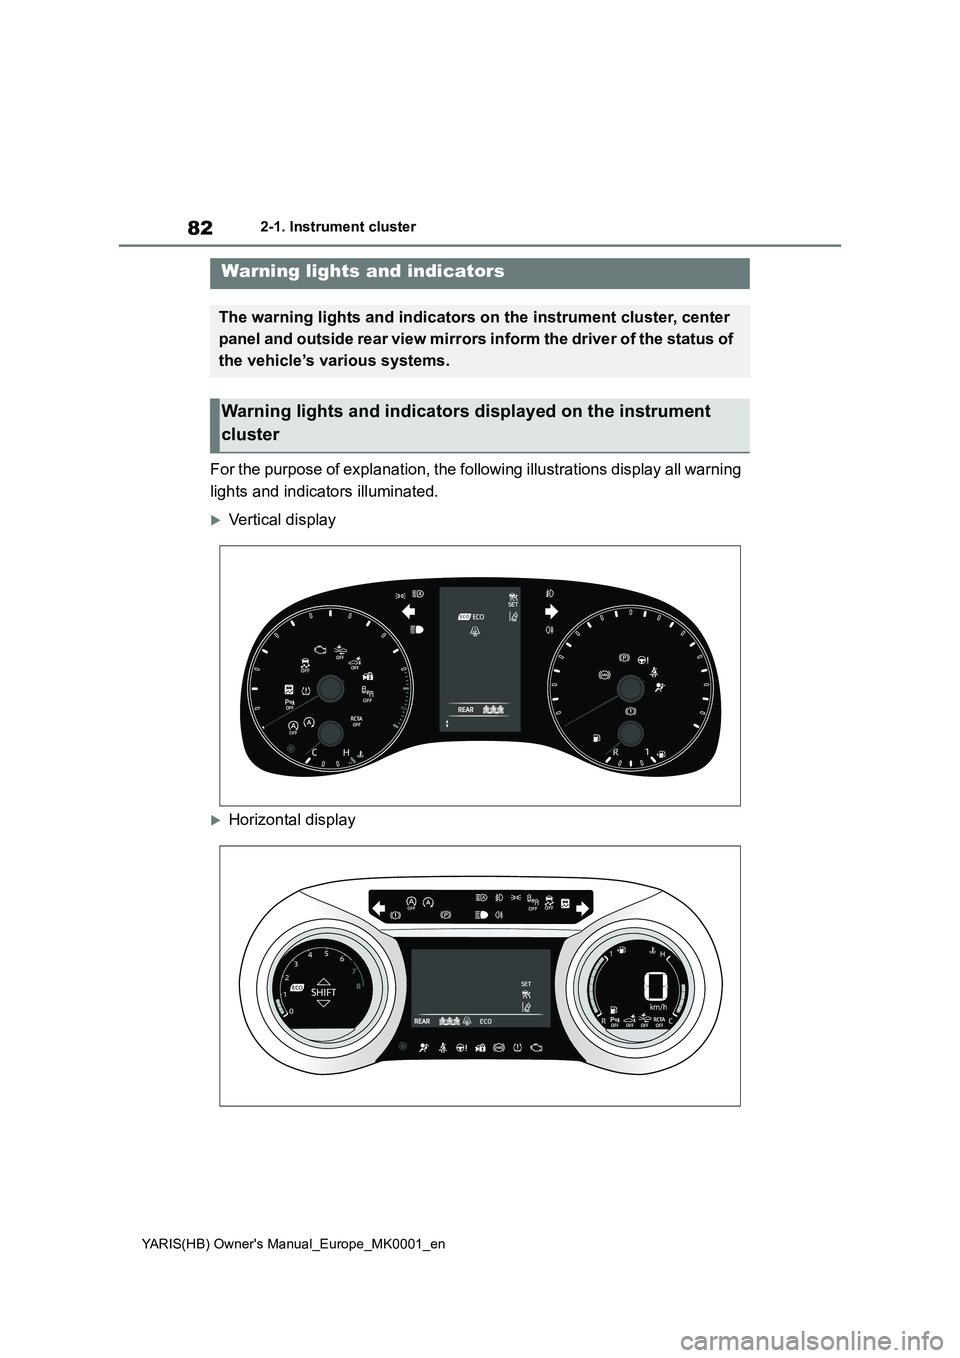 TOYOTA YARIS 2021  Owners Manual 82
YARIS(HB) Owners Manual_Europe_MK0001_en
2-1. Instrument cluster
2-1.In strument clu ste r
For the purpose of explanation, the following illustrations display all warning 
lights and indicators il